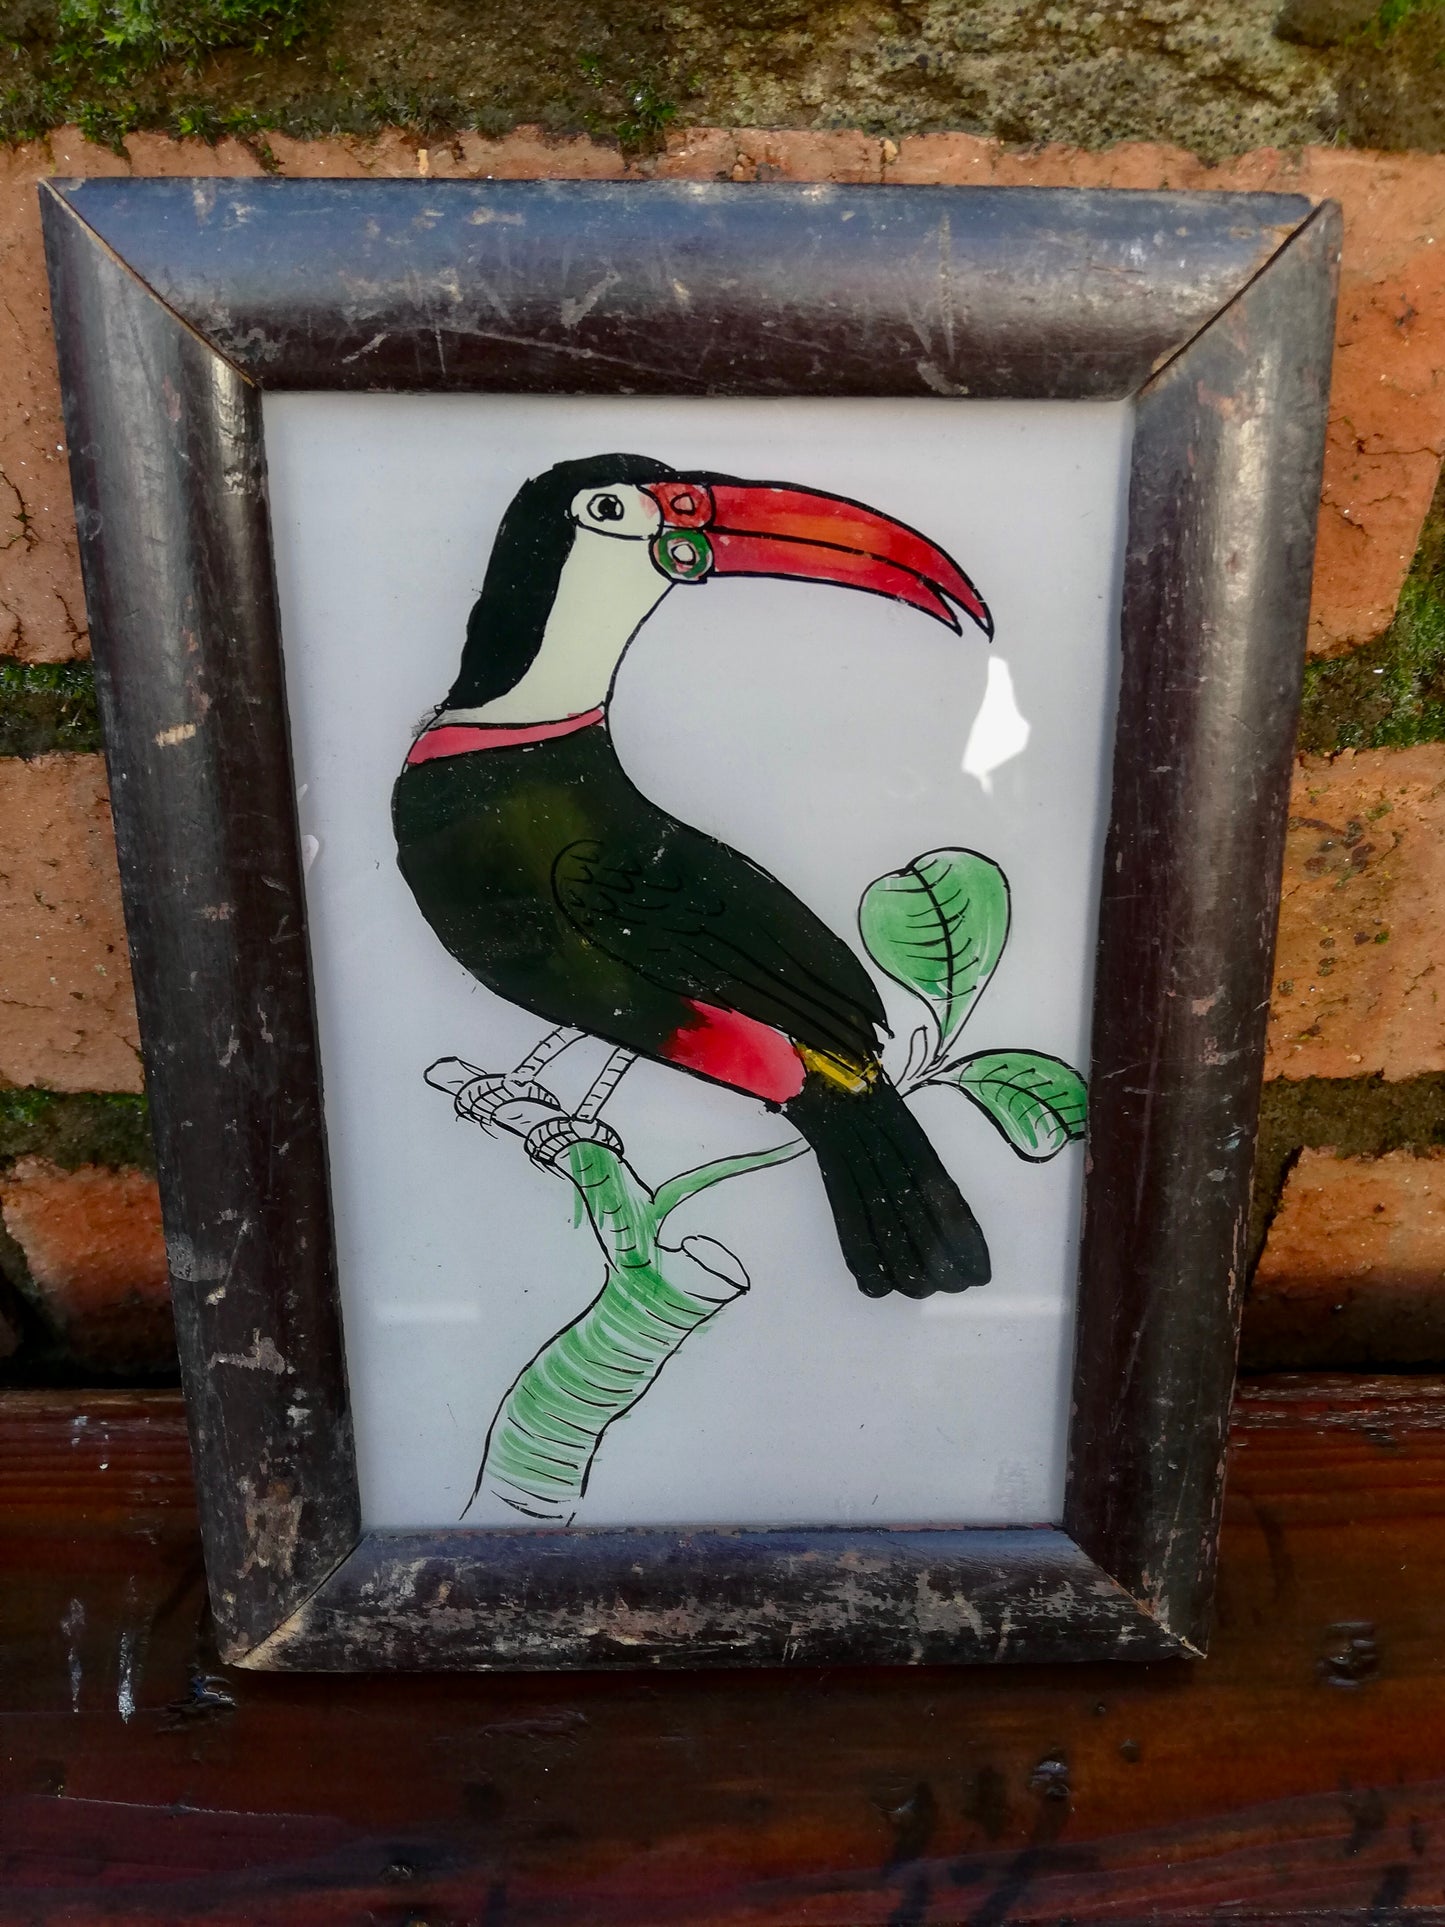 Vintage glass painting of a toucan in a beautiful original frame